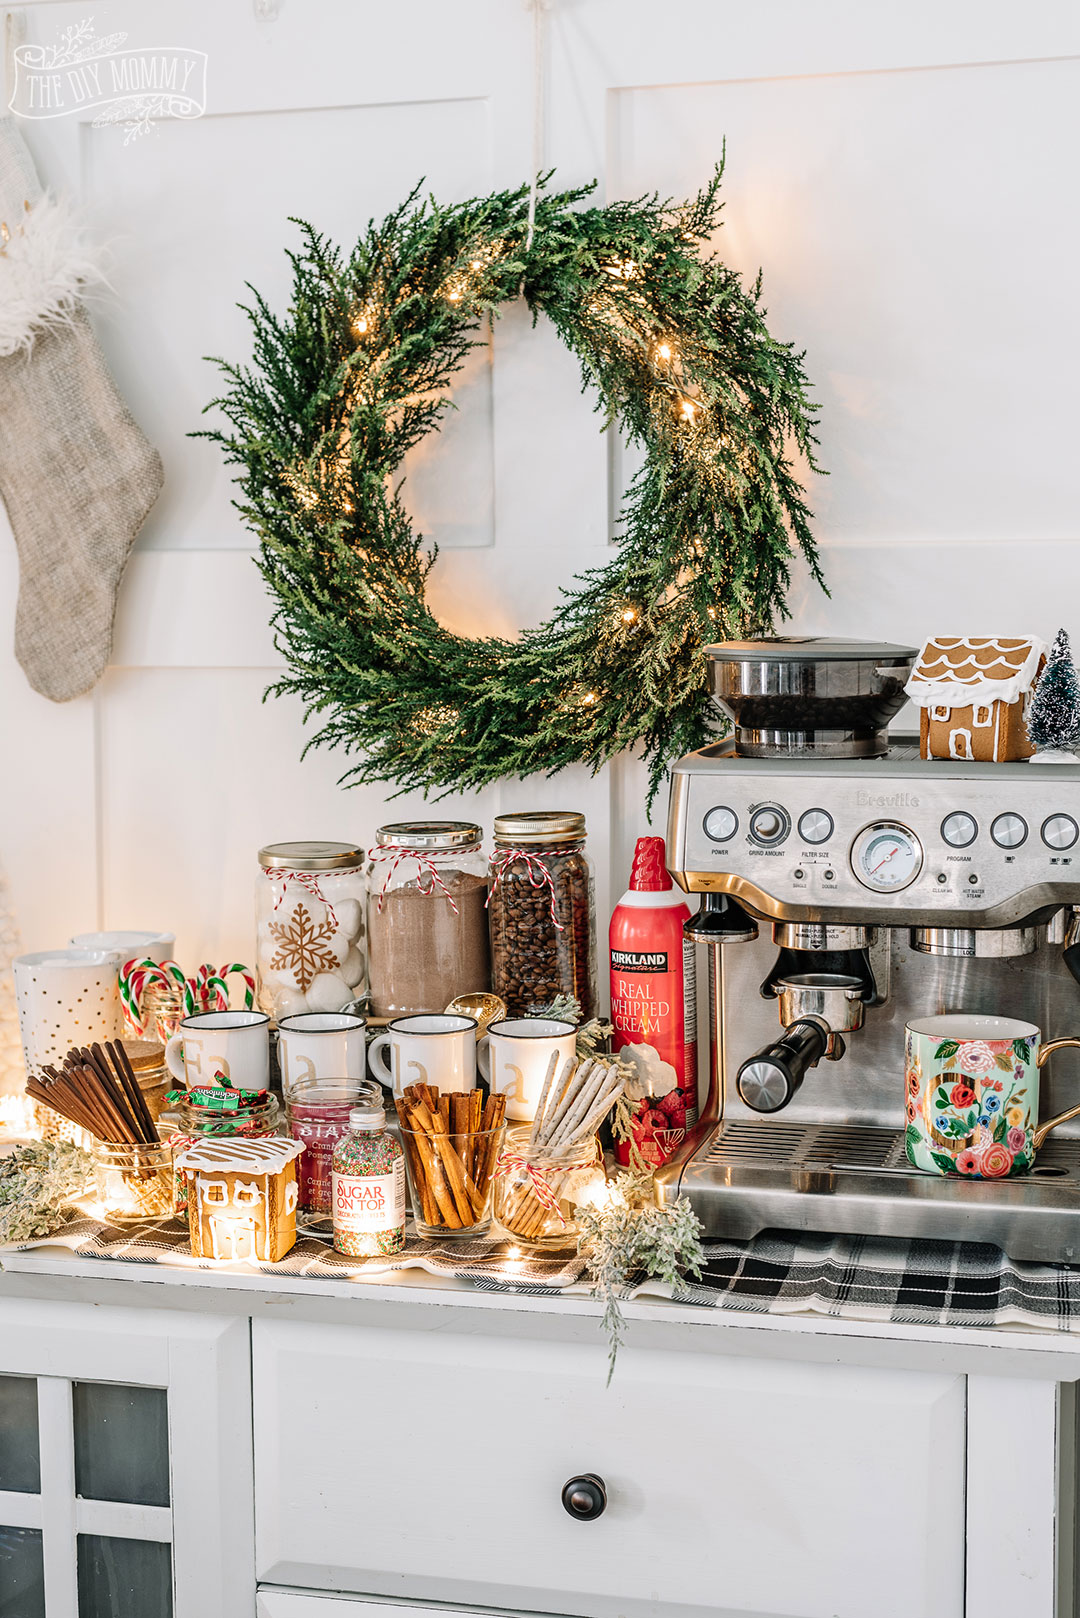 How to Create an Inexpensive Hot Chocolate Station for Christmas